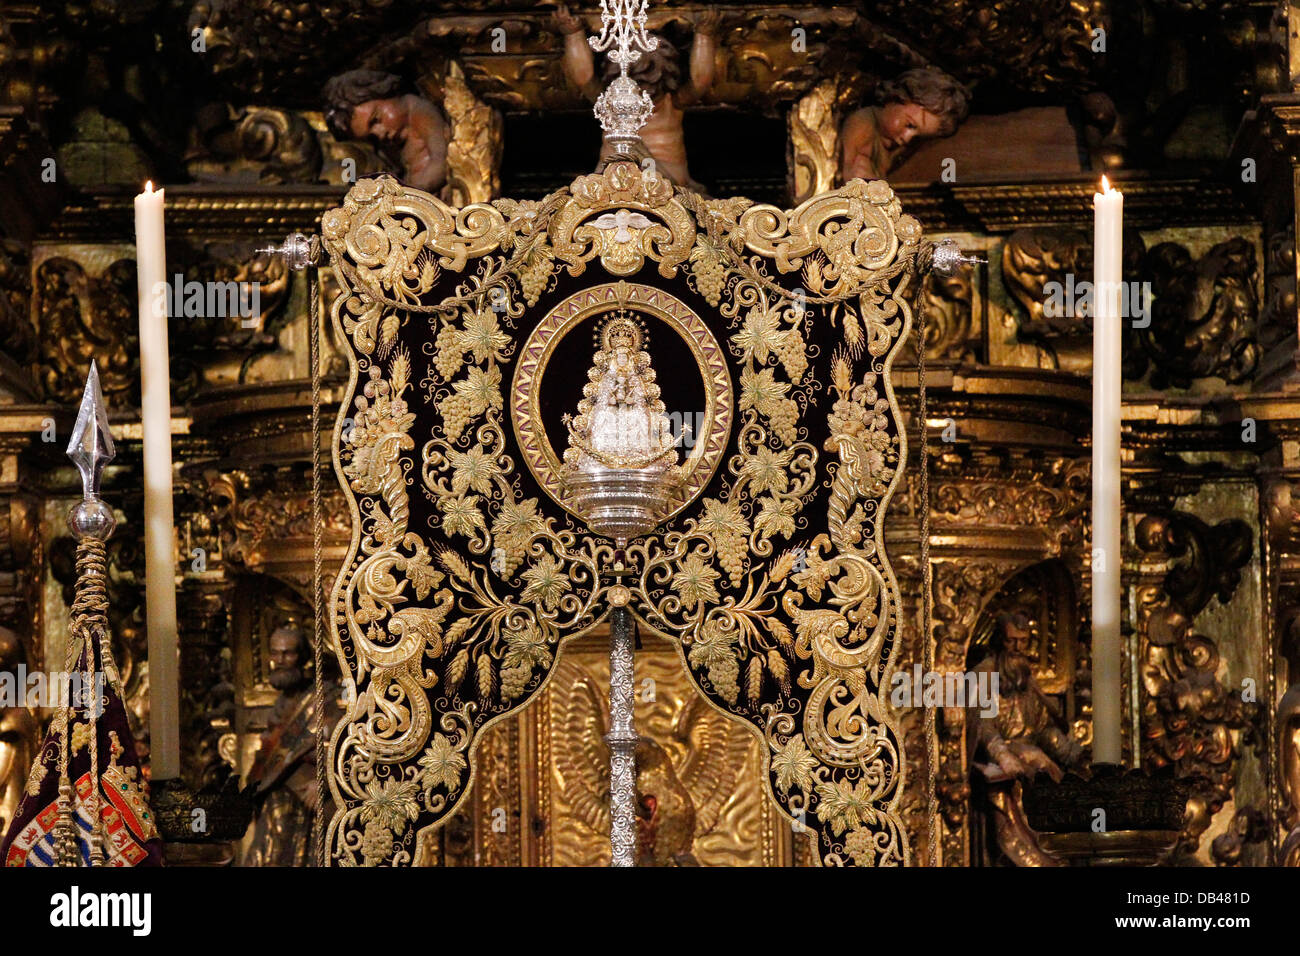 Gilded portrayal of Virgin Mary at the altar in a church in Jerez de la Frontera, Spain Stock Photo